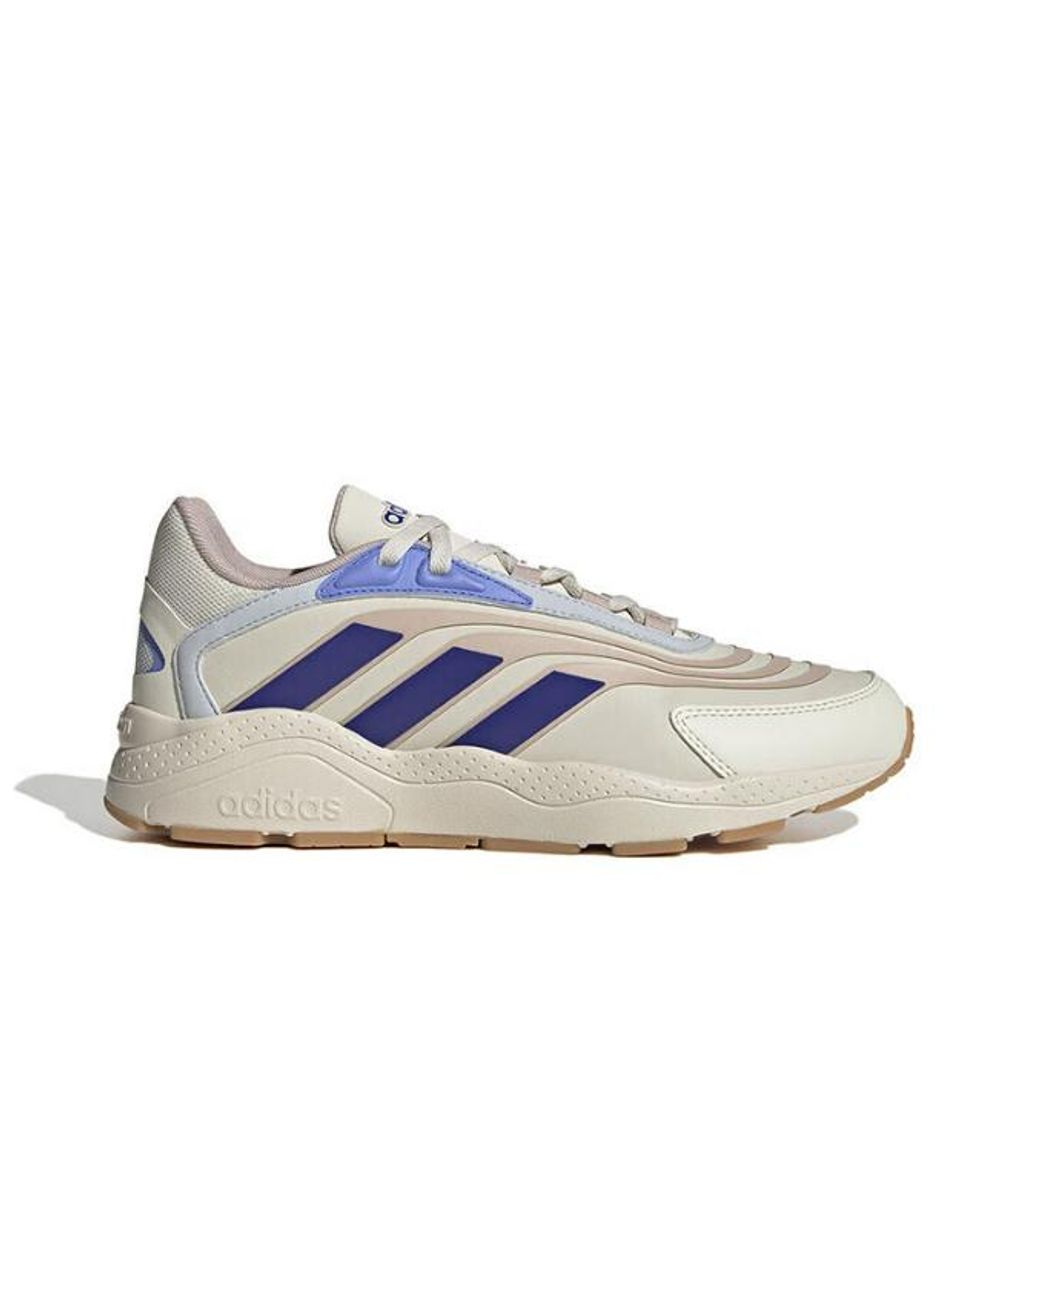 adidas Neo Crazychaos 2.0 'white Violet Pink' in Blue | Lyst